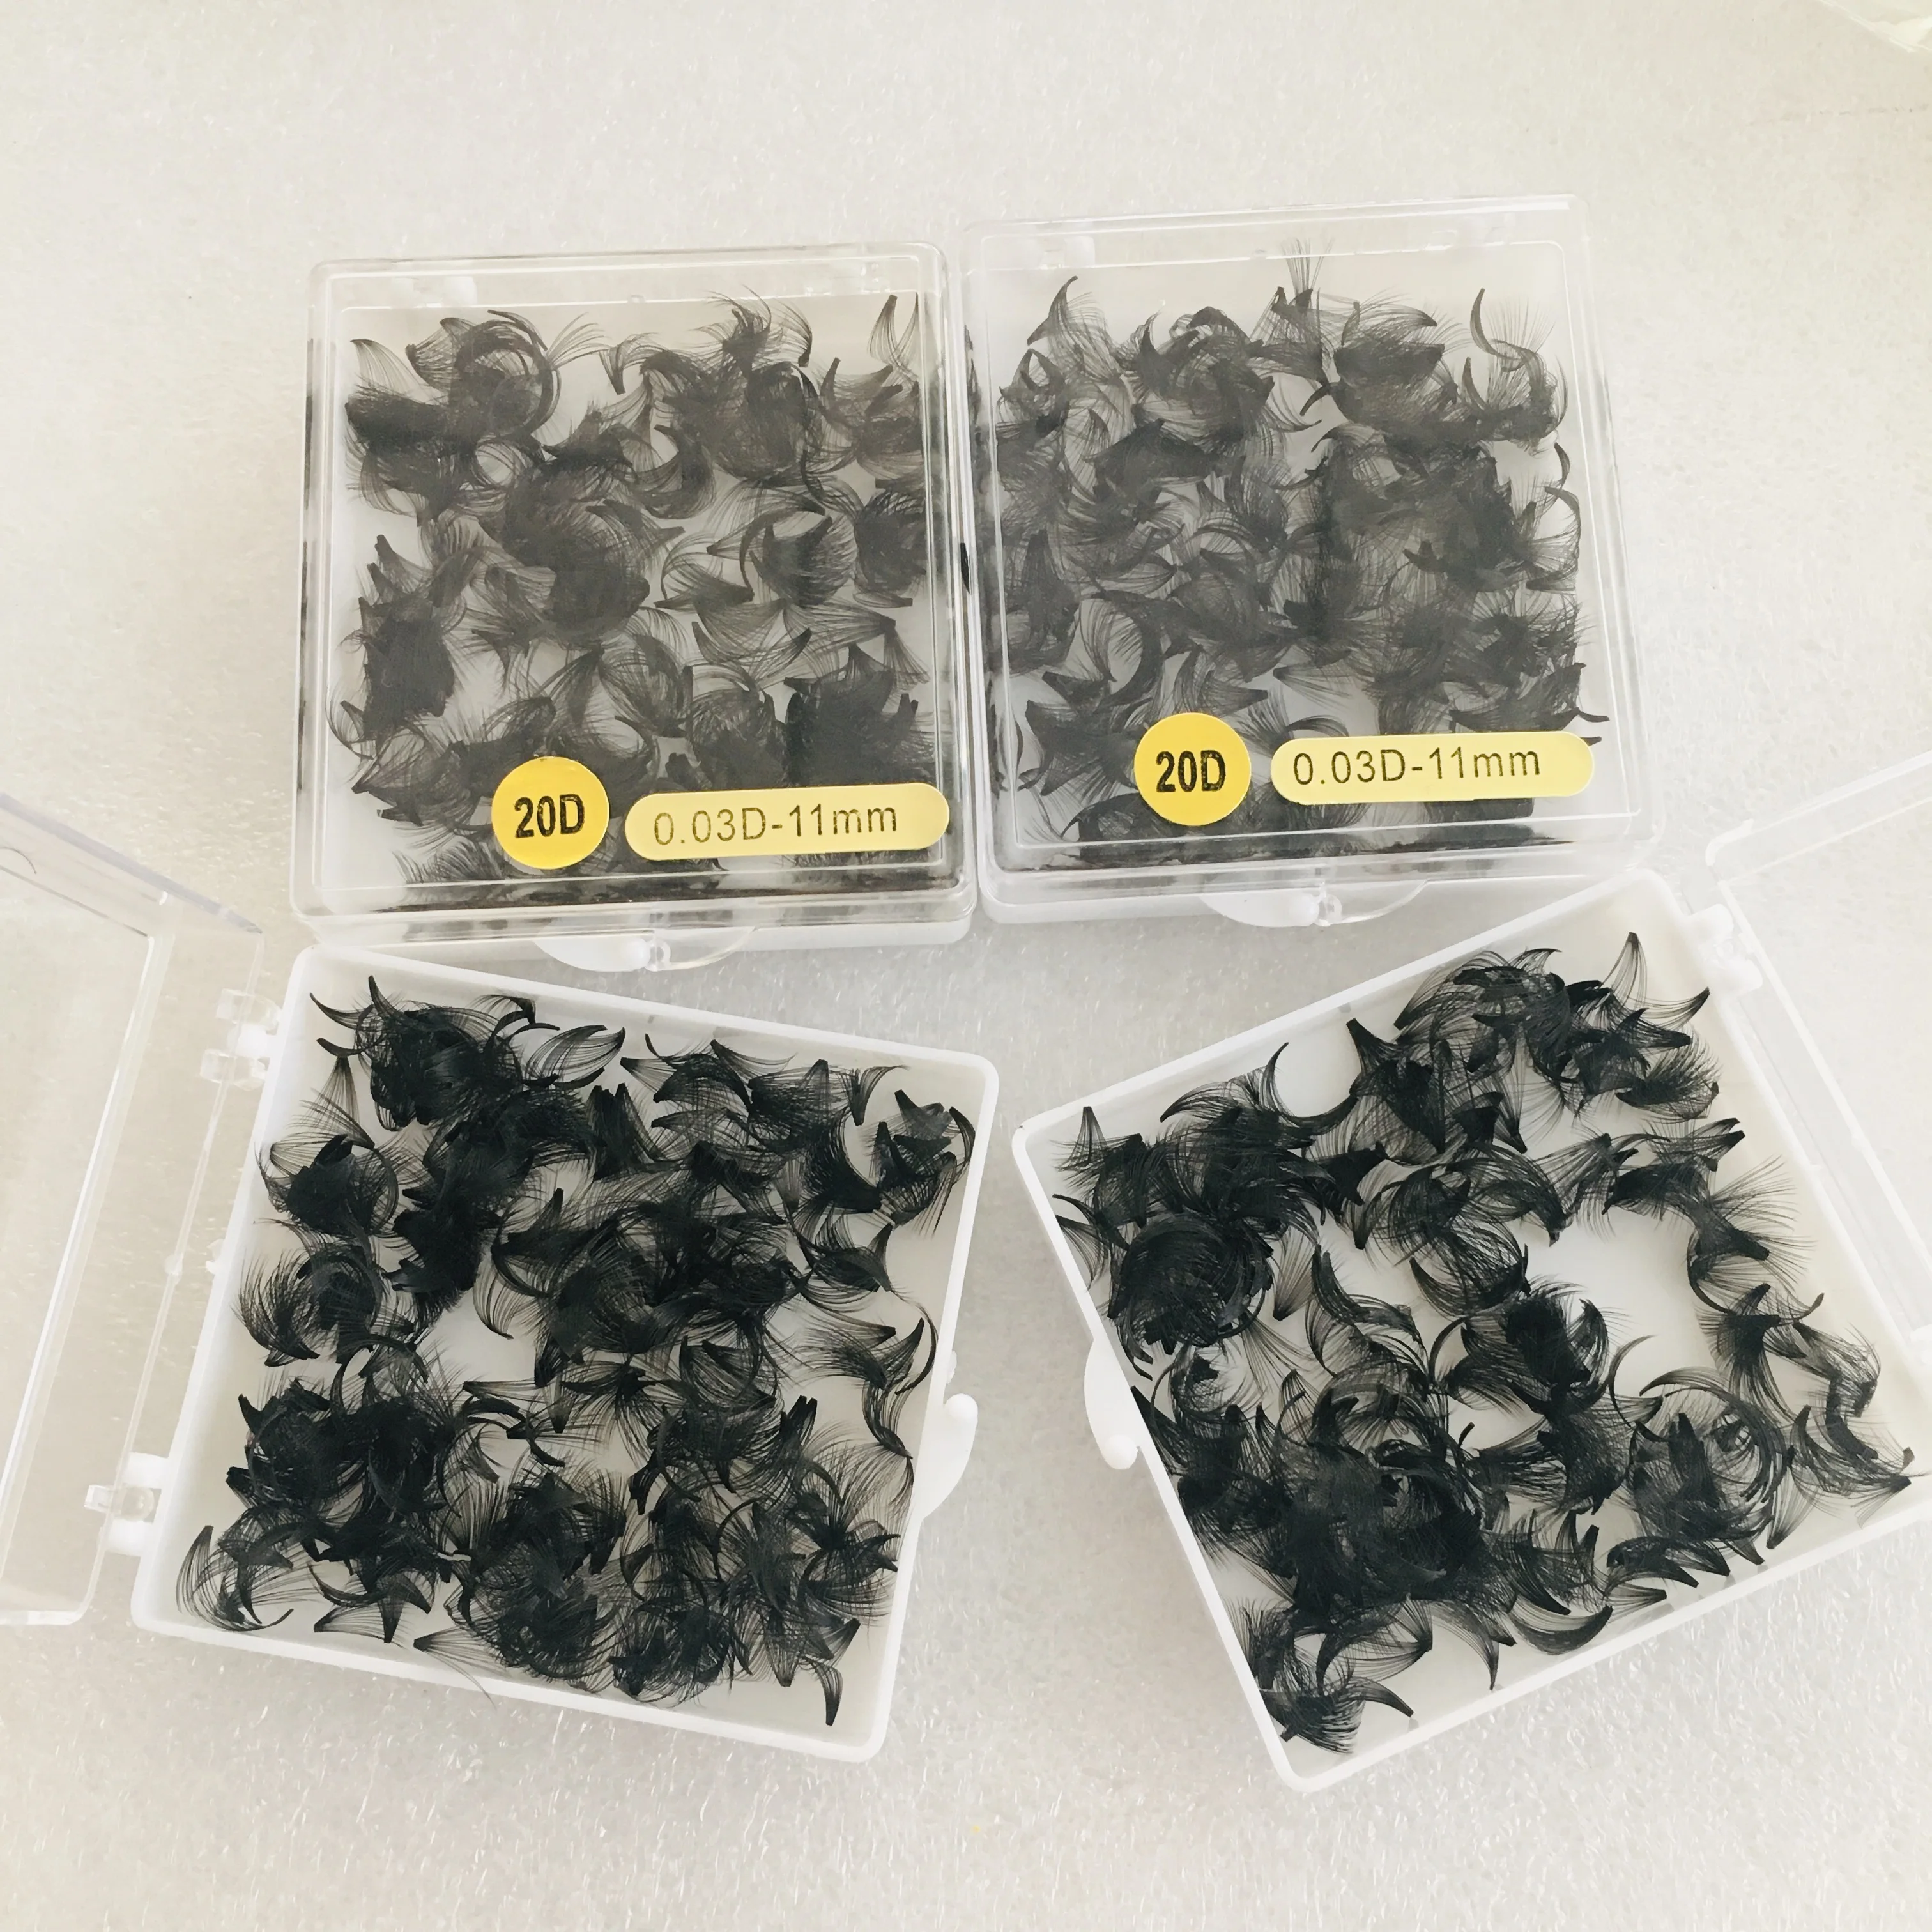 

Bulk Premade Fan 6D/7D/8D/9D 10D 20D Loose Russian Volume Lashesn Volume Lashes 0.07 0.05 0.03 thickness Extension, Black or according to client's special request